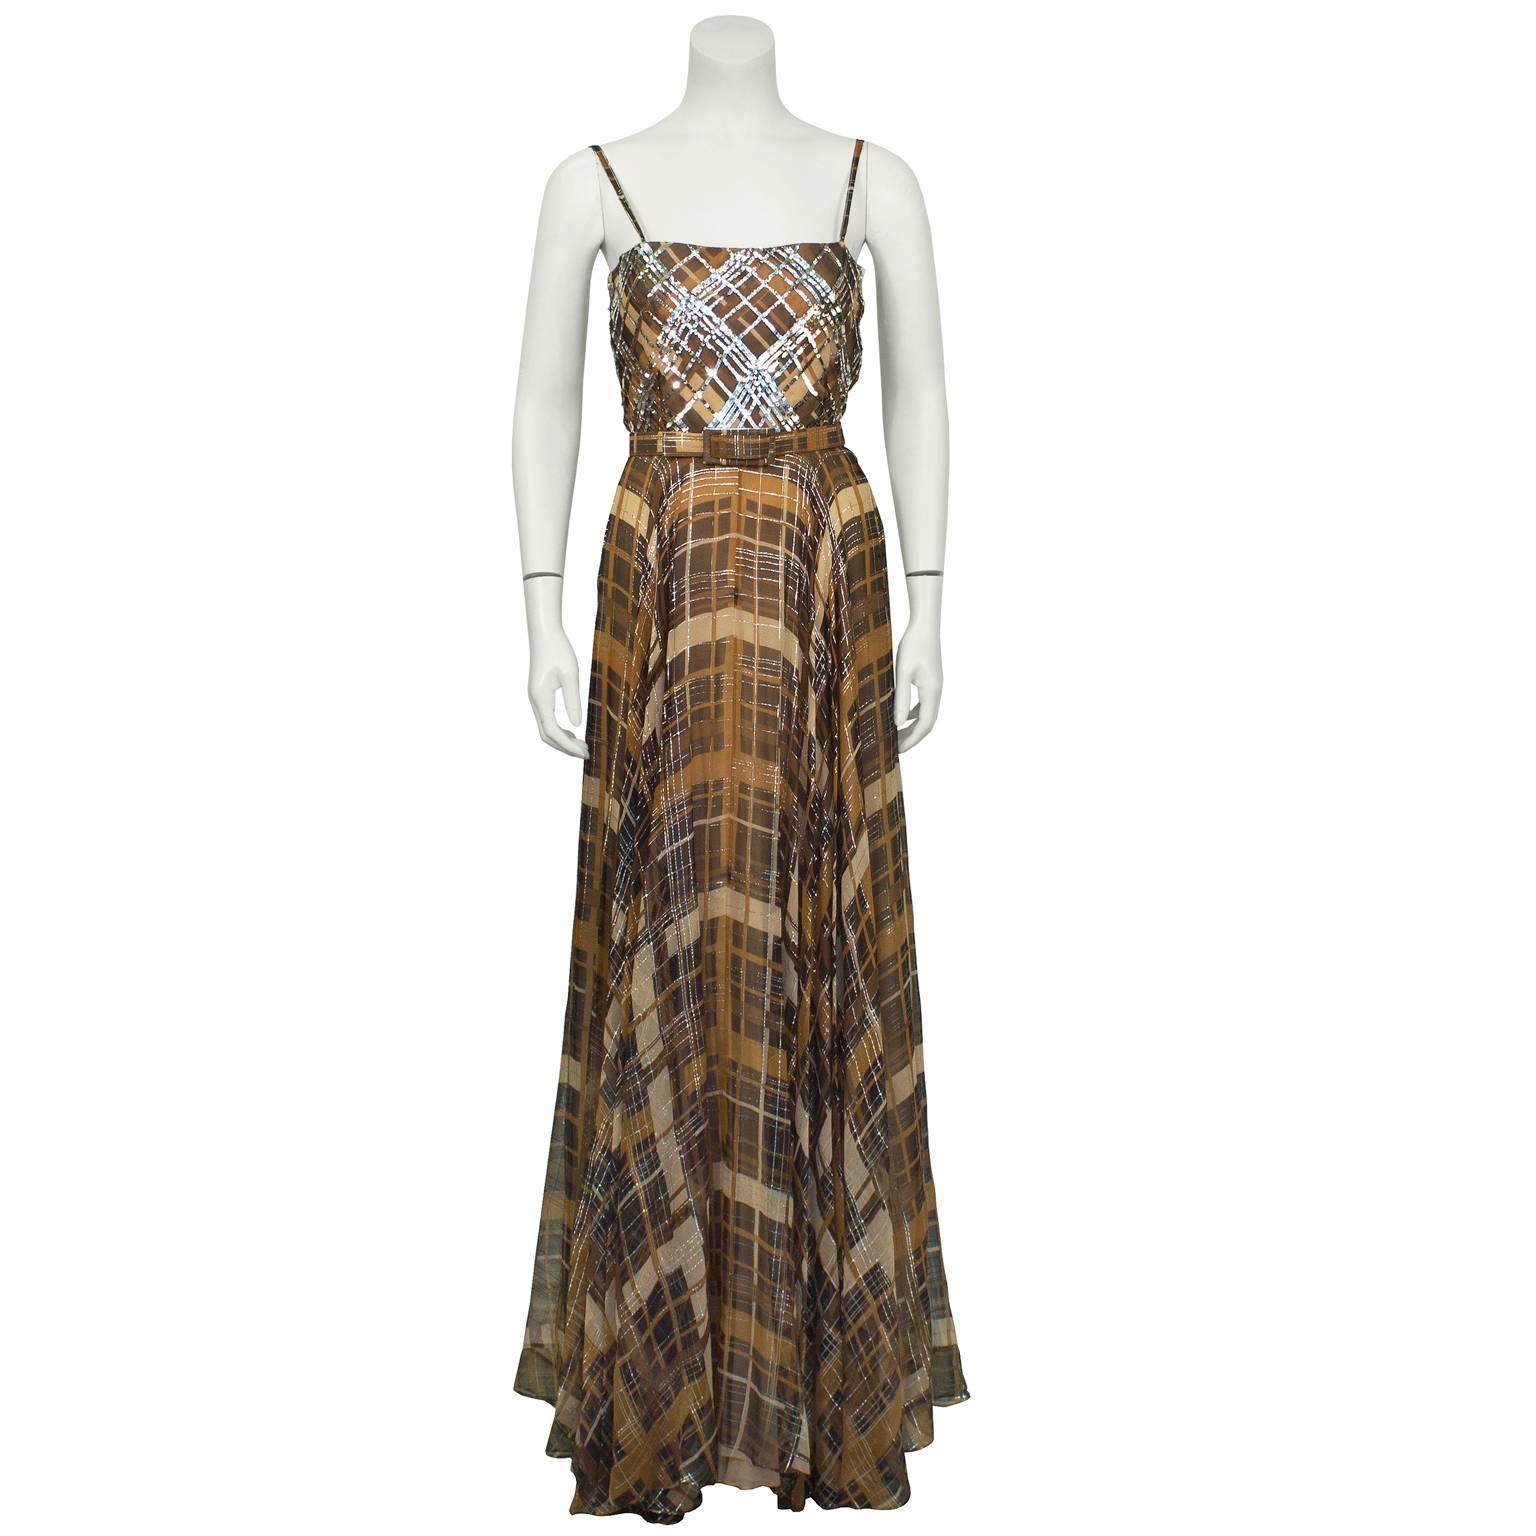 Larry Aldrich brown and silver plaid gown from the 1970's. The spaghetti-strap camisole neckline gown features a silver sequined plaid pattern bodice. Beautiful brown and silver lurex plaid chiffon falls from the natural waist and is gathered on